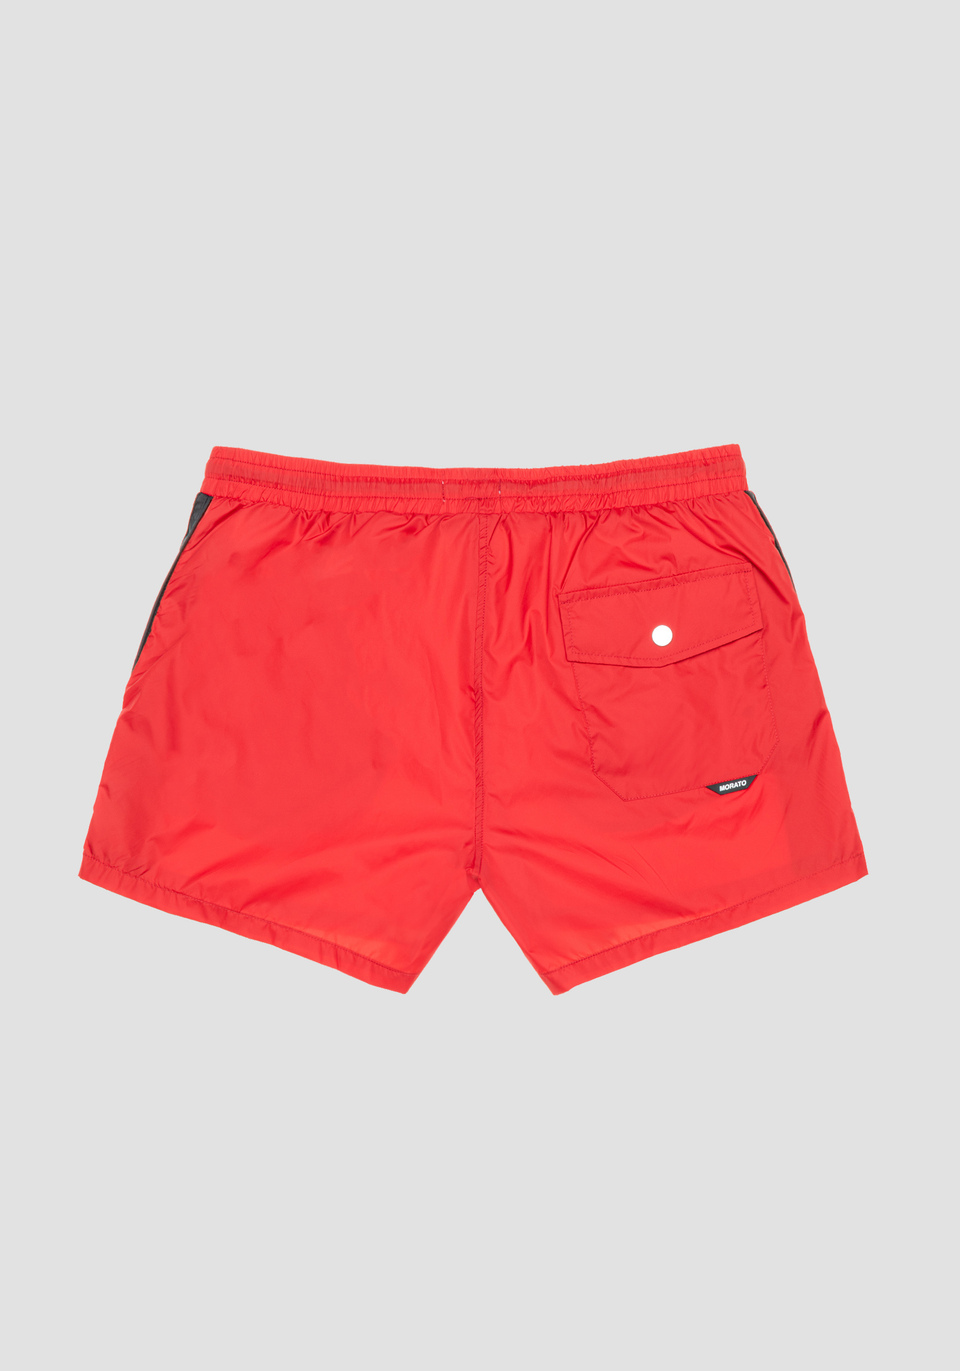 SLIM-FIT SWIMMING TRUNKS IN TECHNICAL FABRIC WITH SIDE BANDS - Antony Morato Online Shop